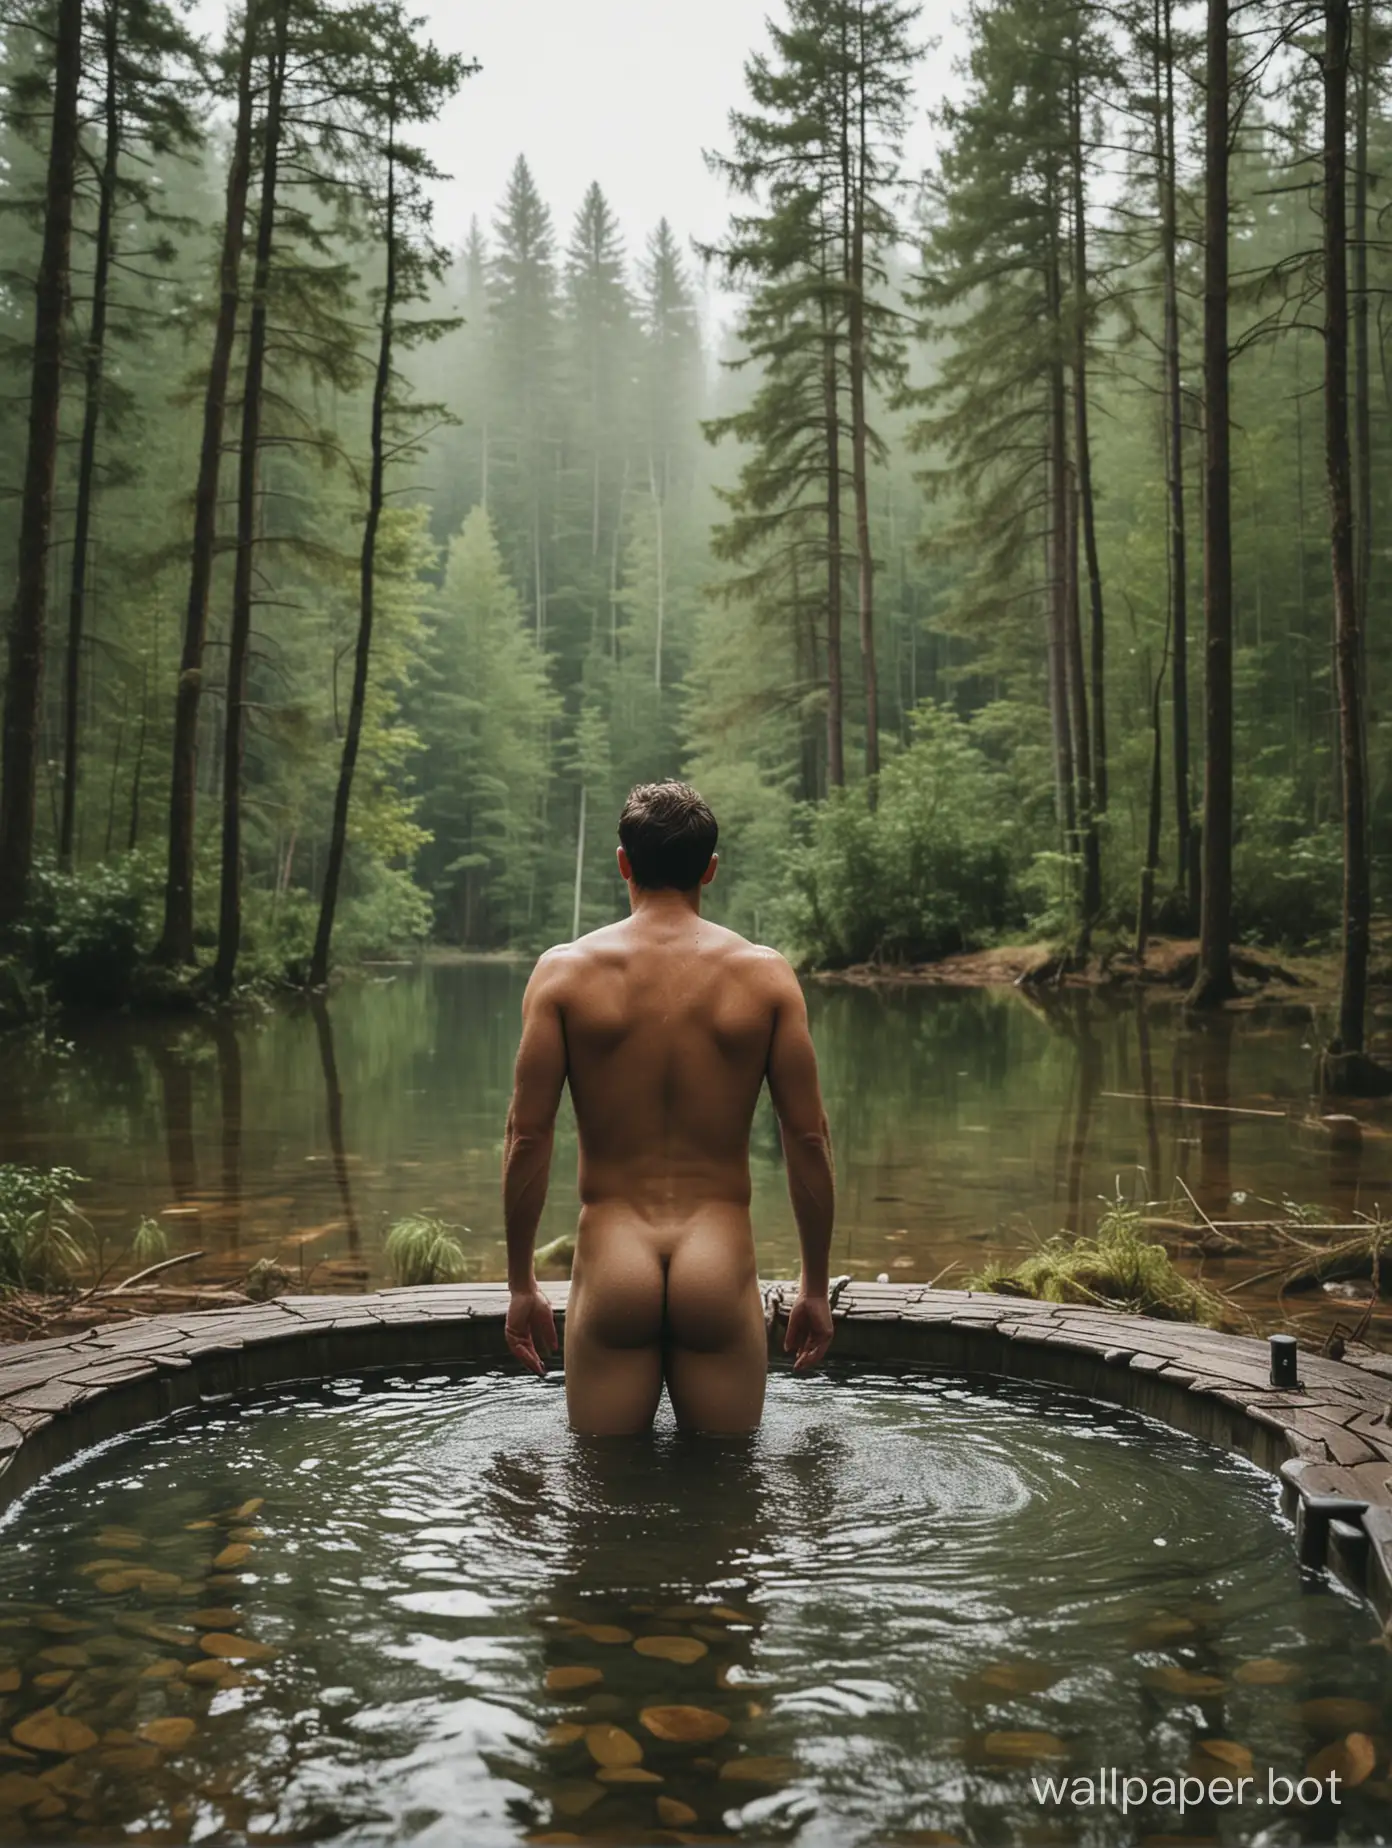 Man standing in a bathtube full of water, nude, facing of a forest landscape